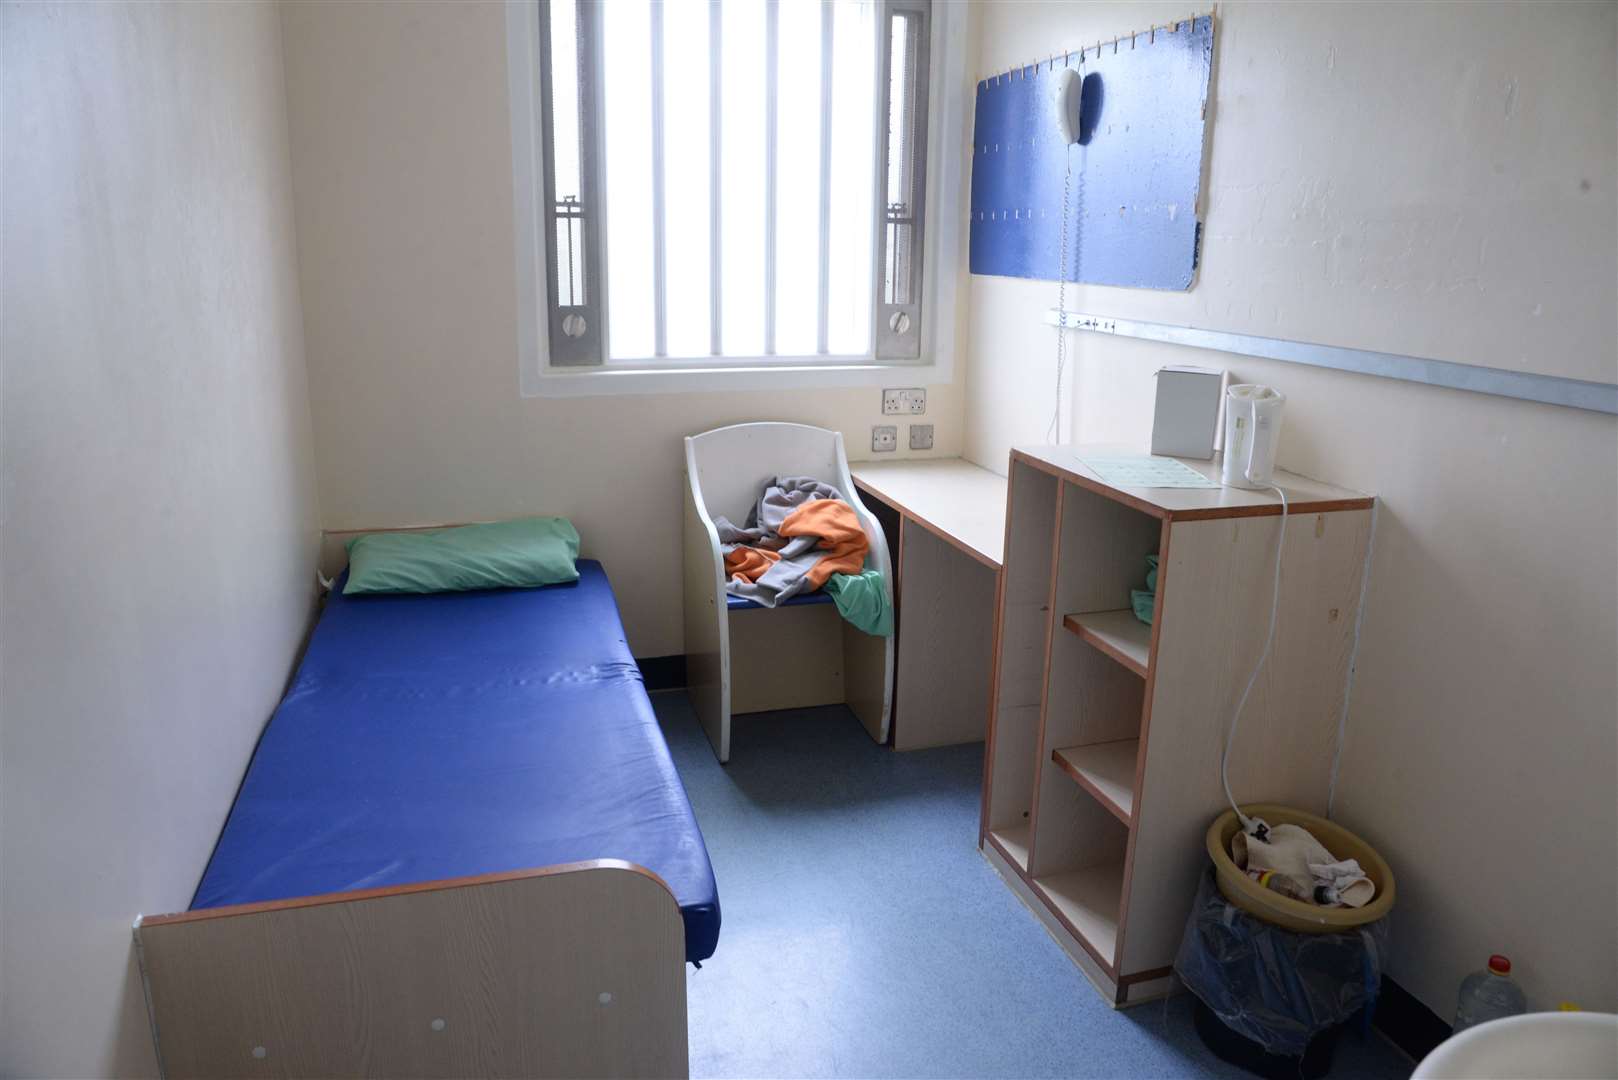 One of the cells at HMP Swaleside. Picture: Chris Davey